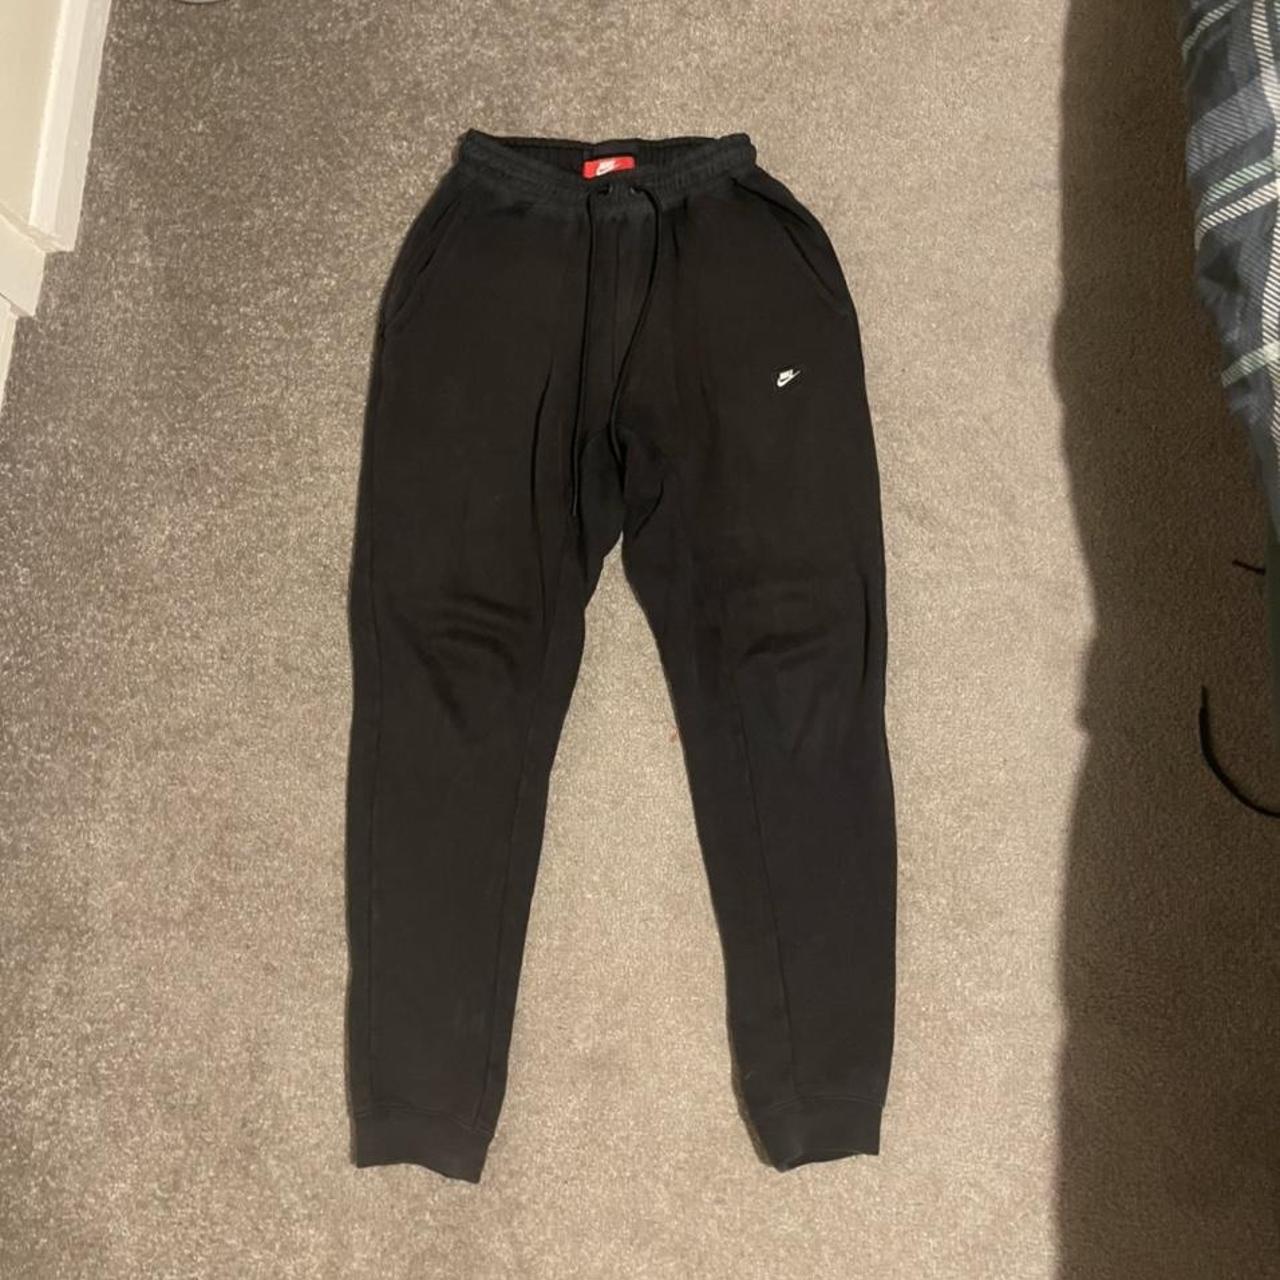 Nike joggers worn but in good condition still size S - Depop